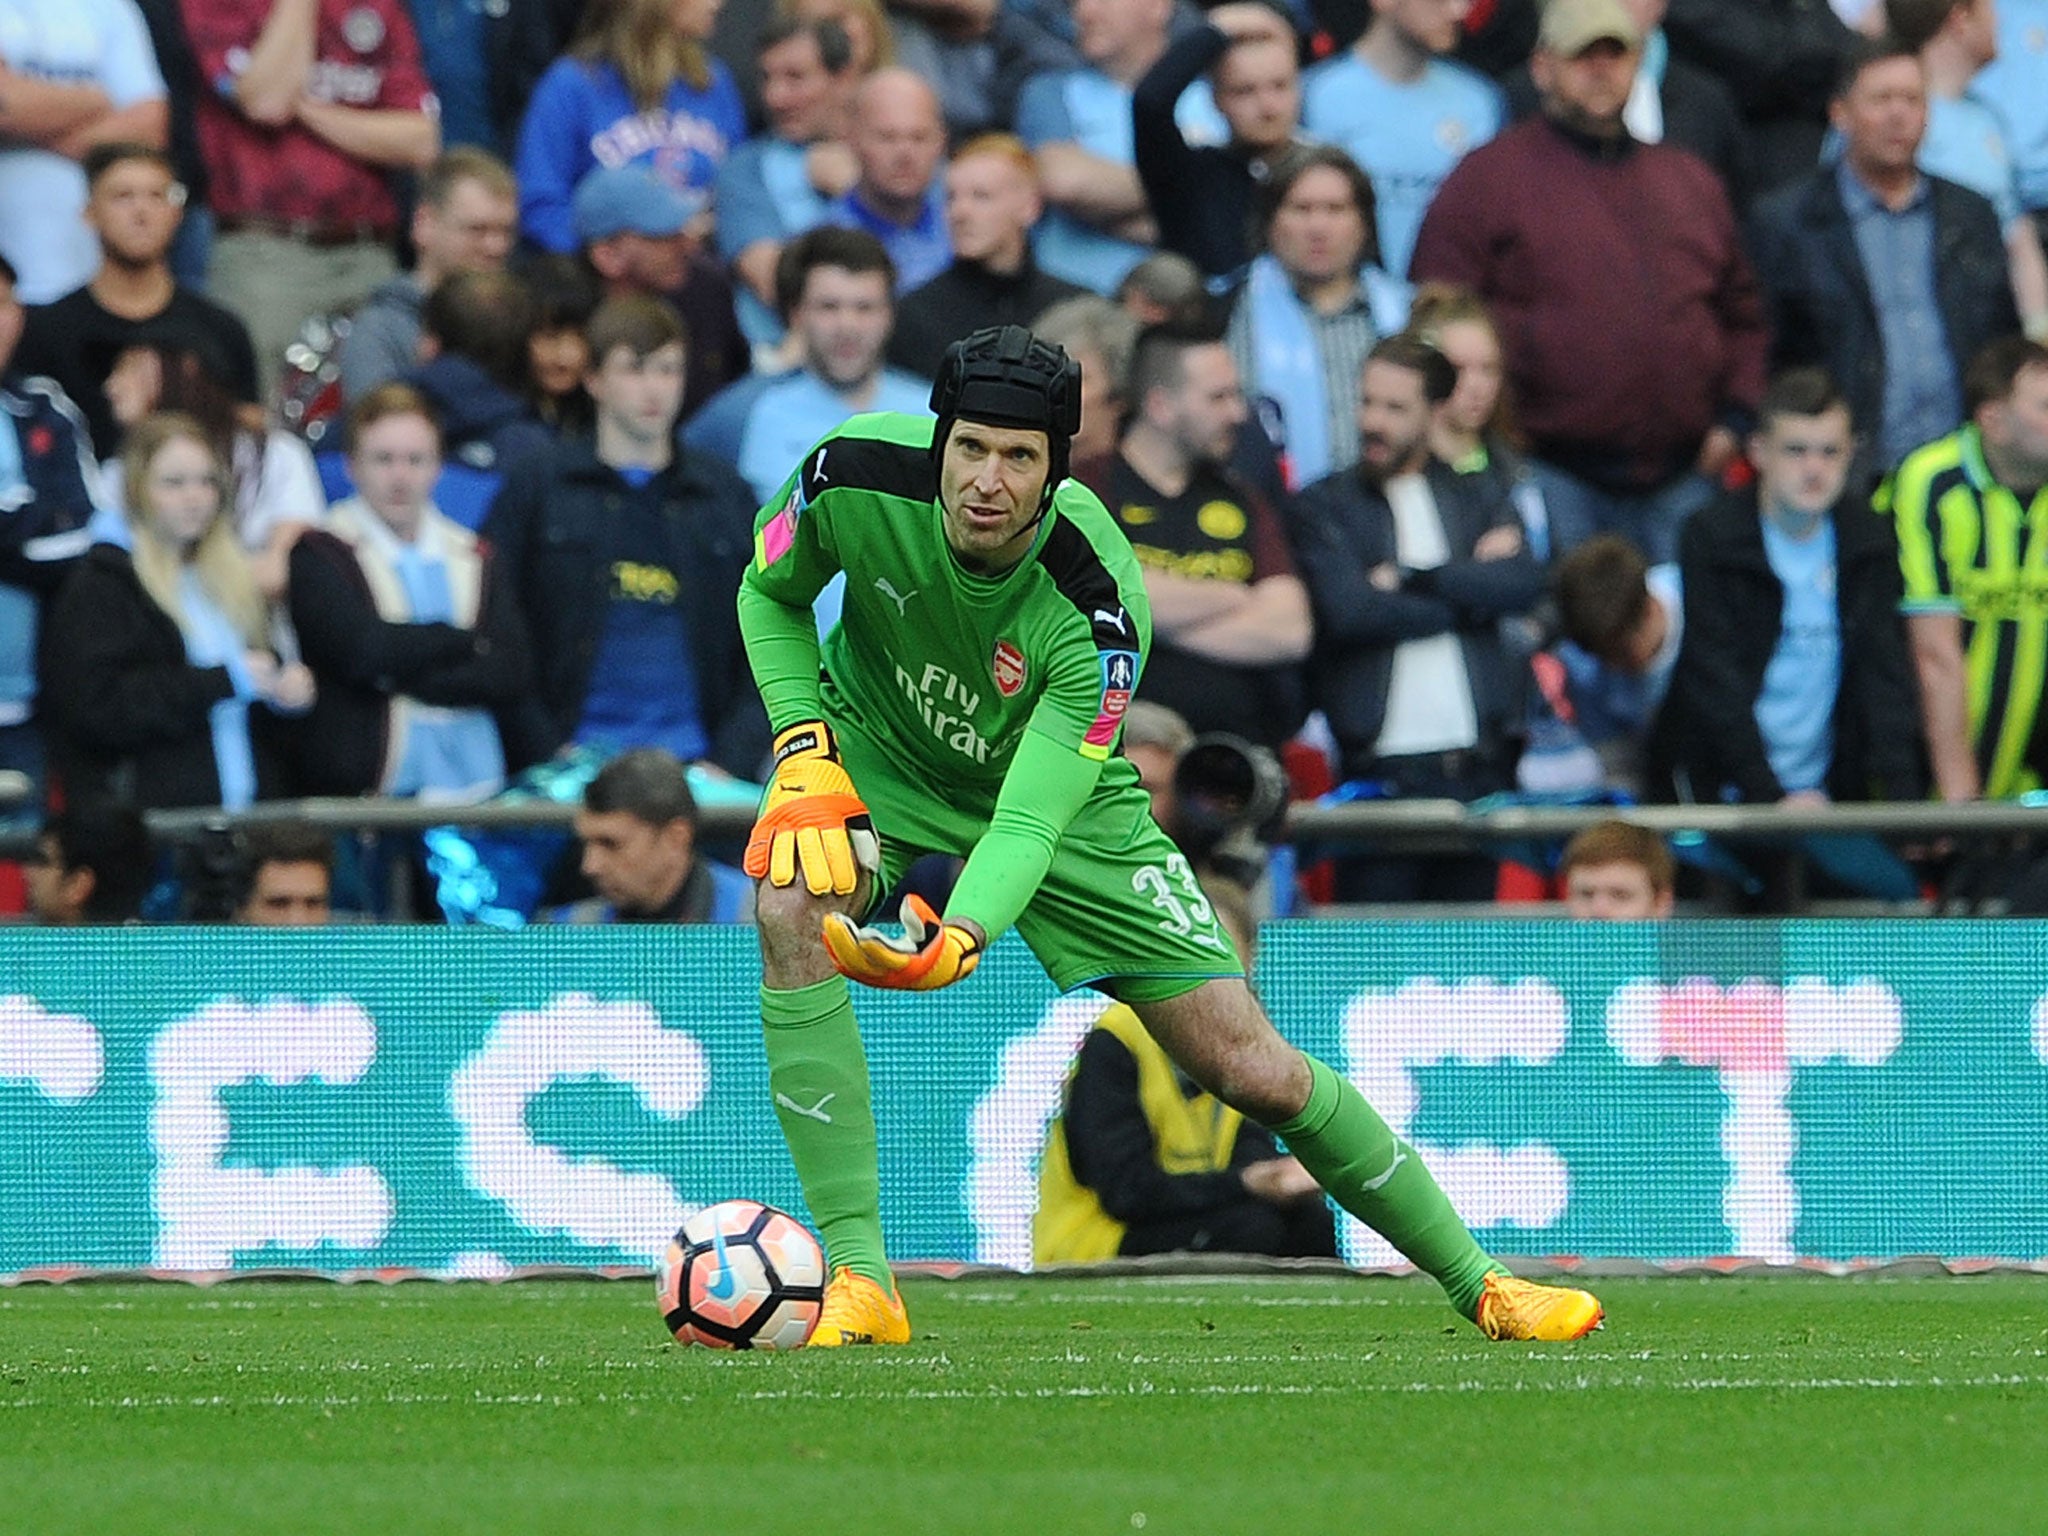 Petr Cech admitted that the pressure his side faces will continue to rise